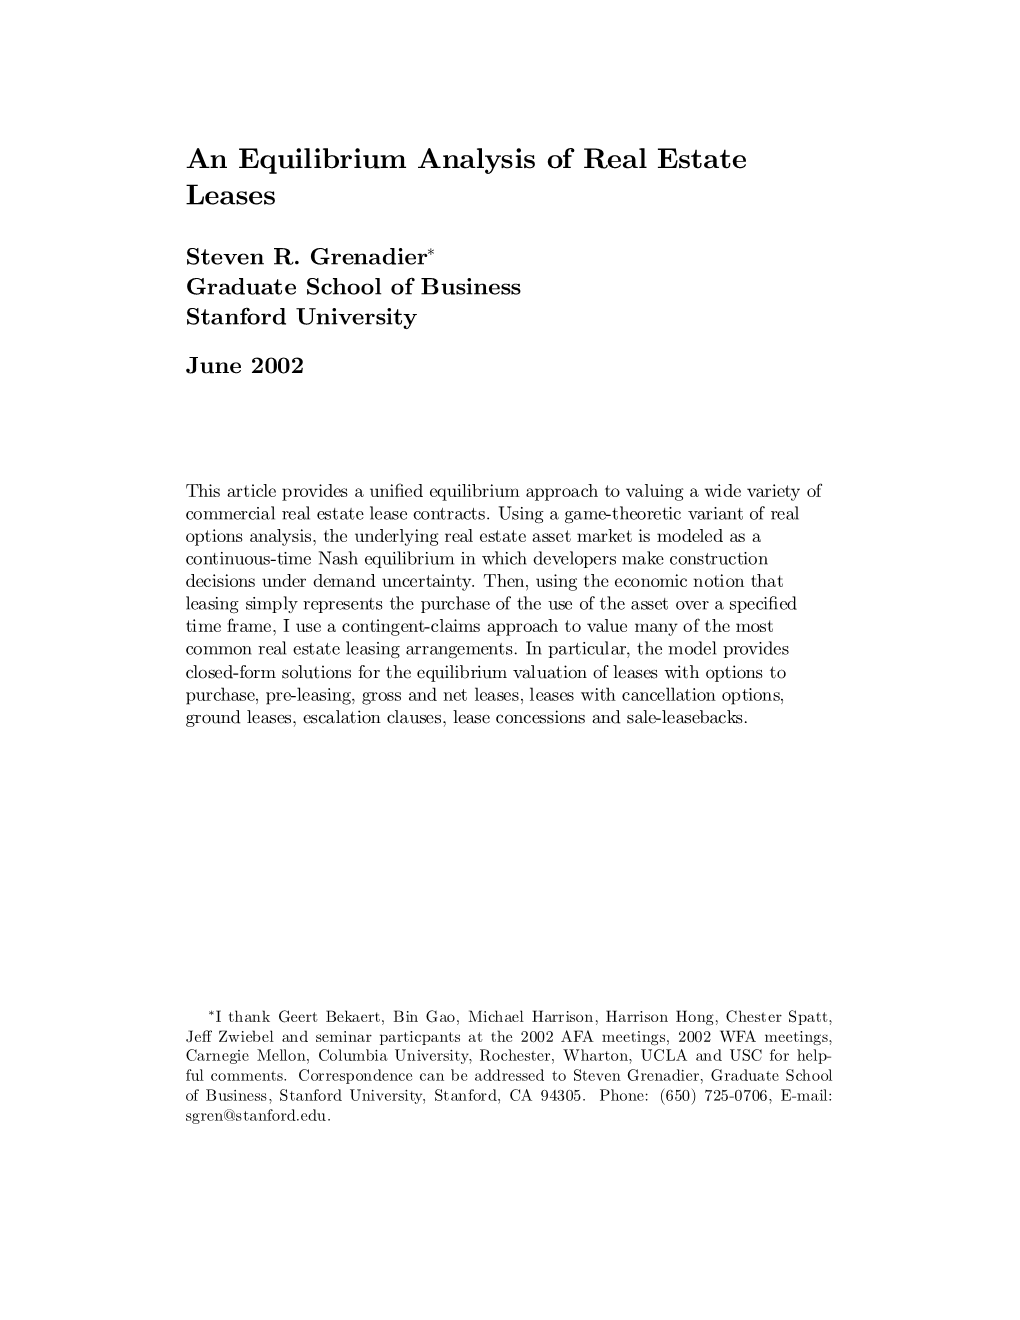 An Equilibrium Analysis of Real Estate Leases